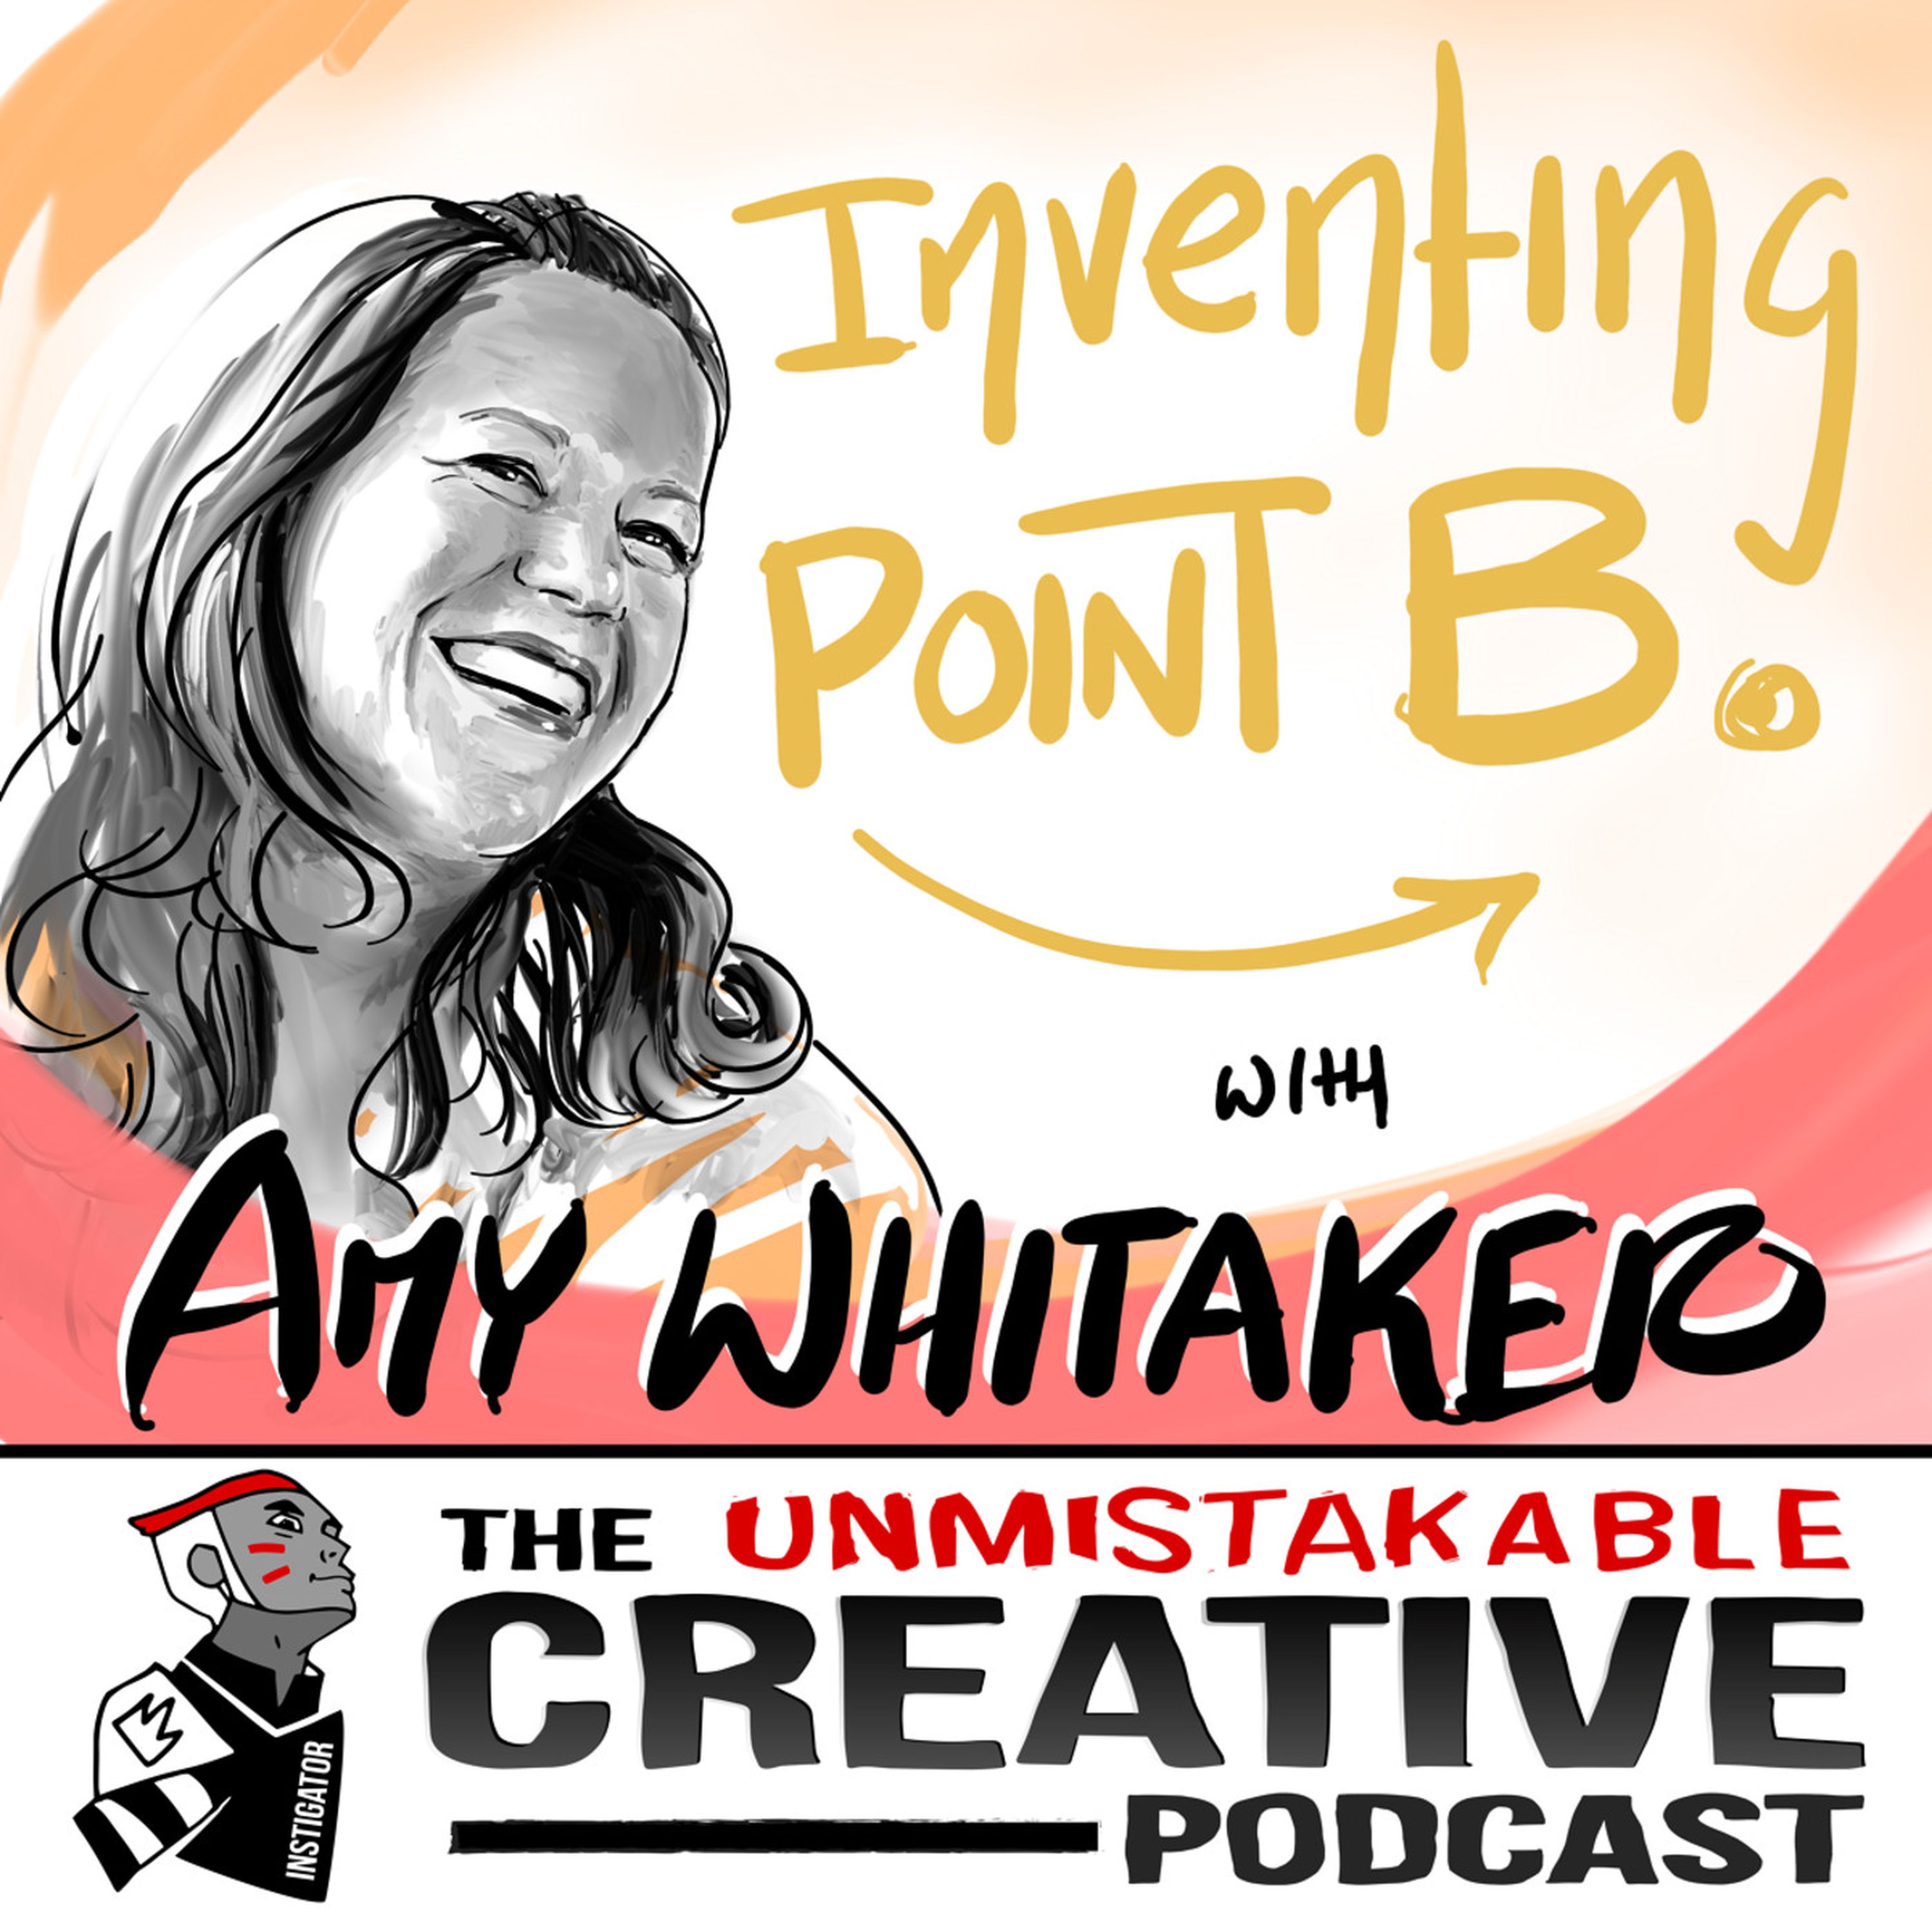 Inventing Point B with Amy Whitaker